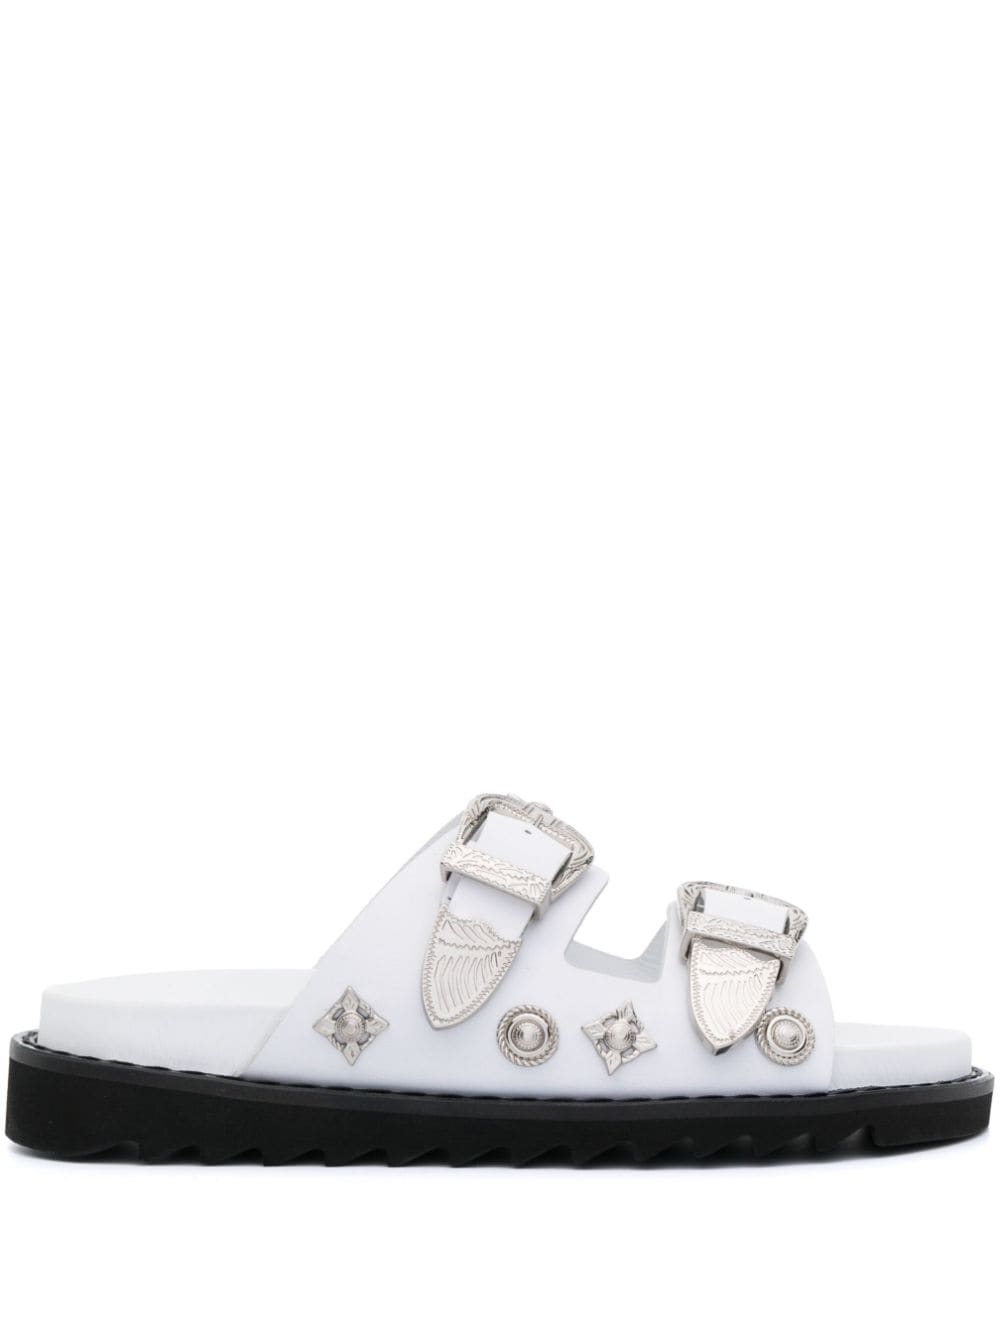 Toga Double-buckle Slip-on Sandals In White